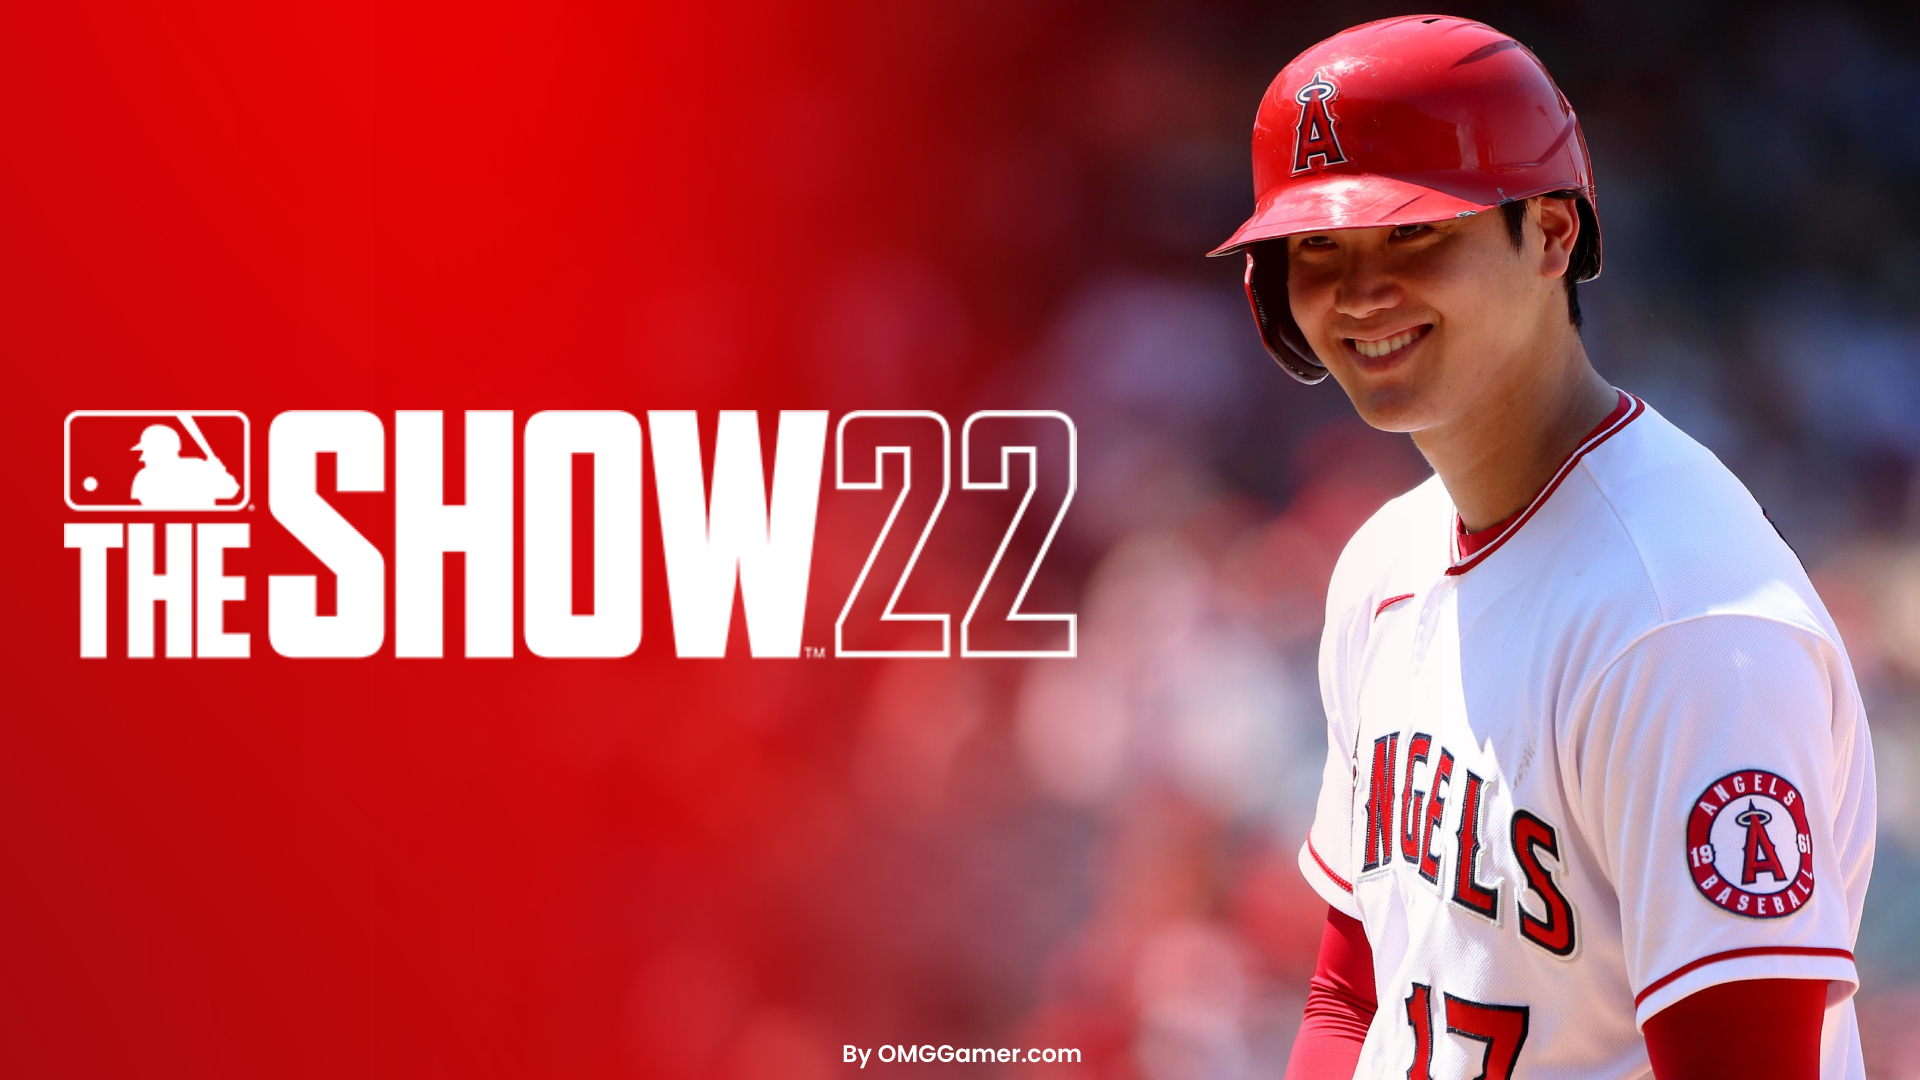 mlb-the-show-22-release-date